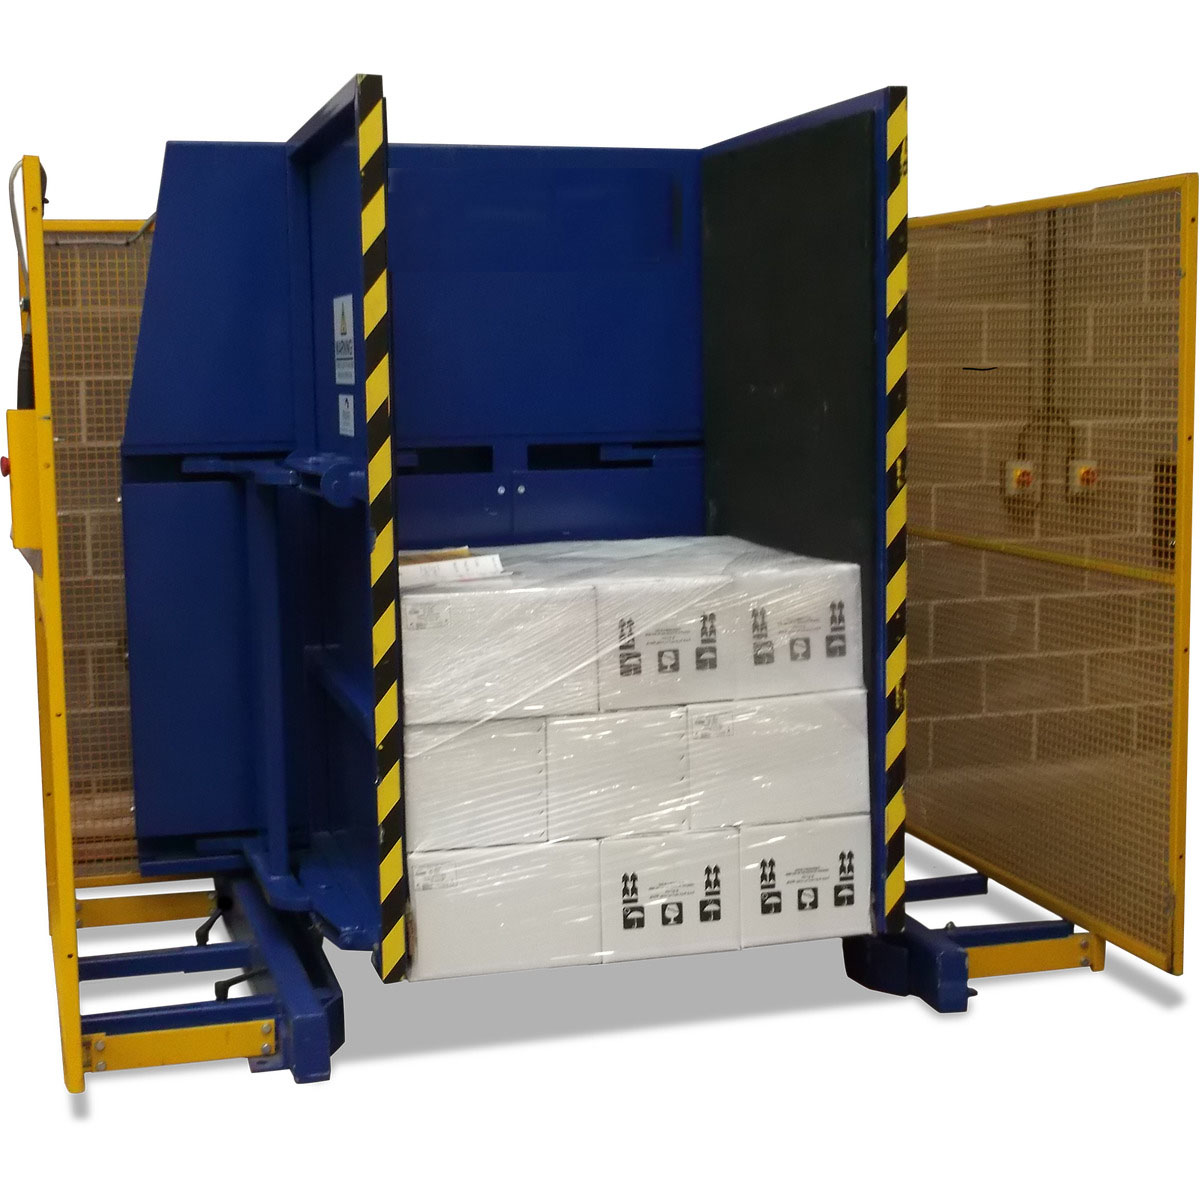 Tray changer can make it faster and easier for you to replace loaded trays or damaged trays.